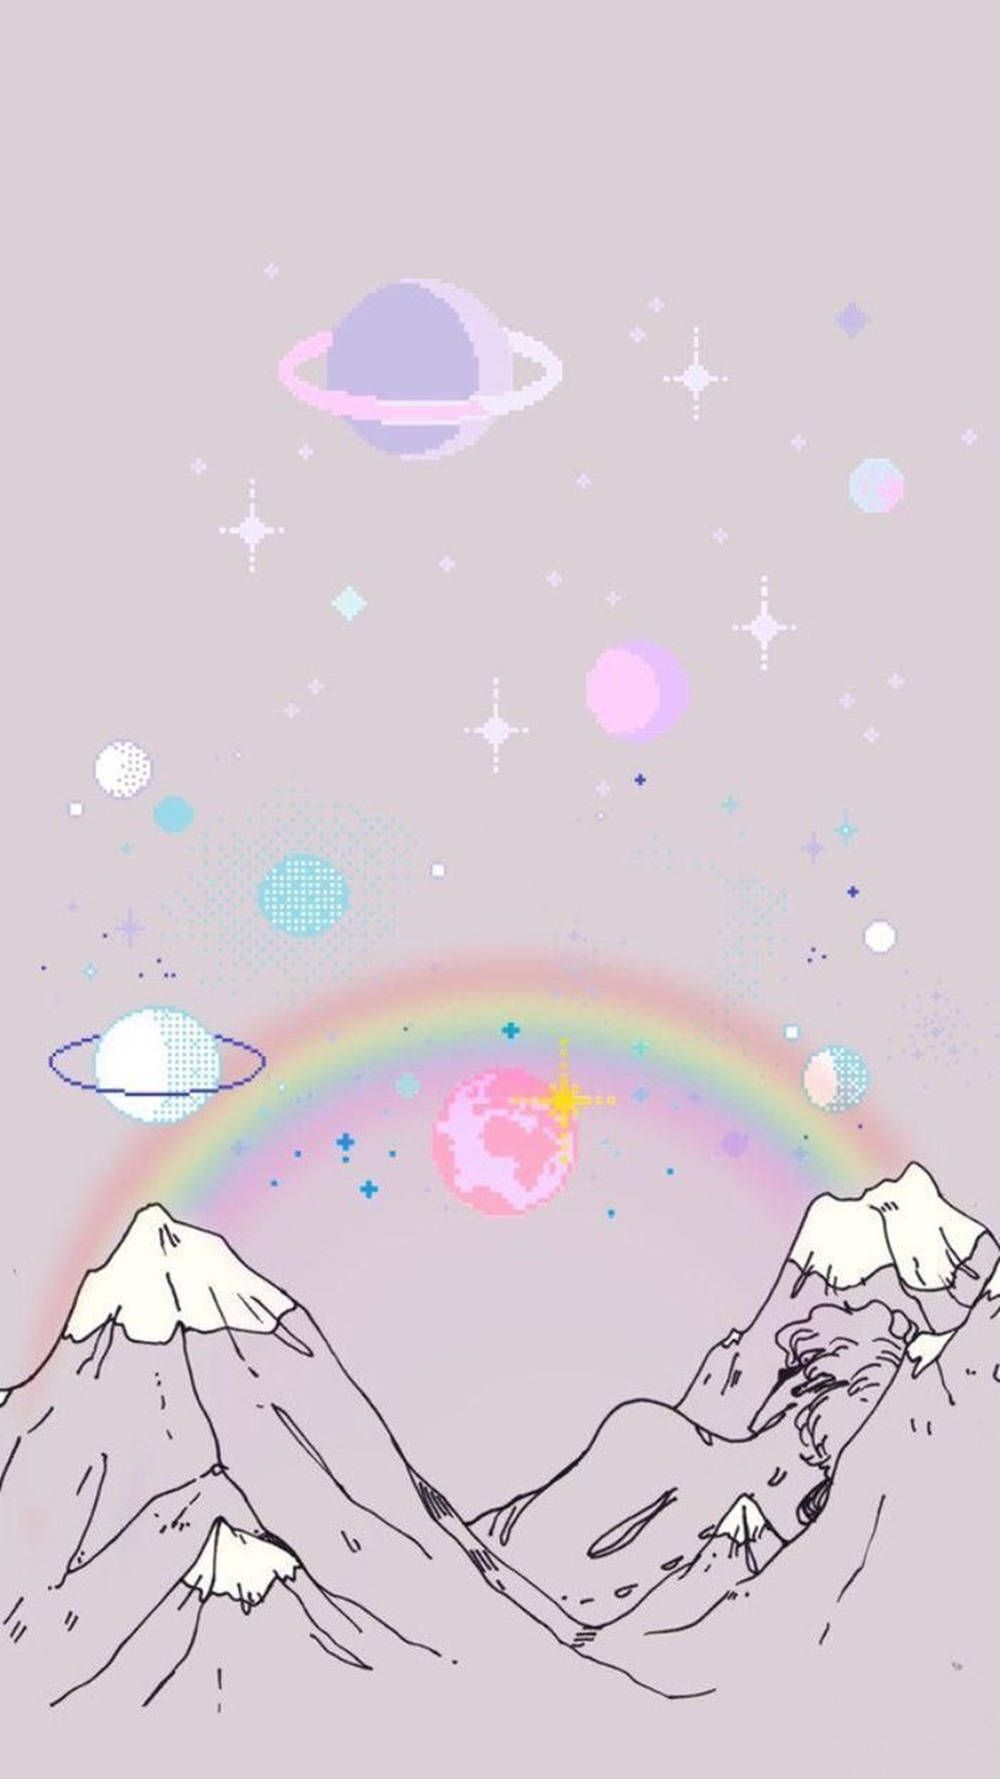 A rainbow in the sky with mountains and stars - Kawaii, cute, pastel, pretty, YouTube